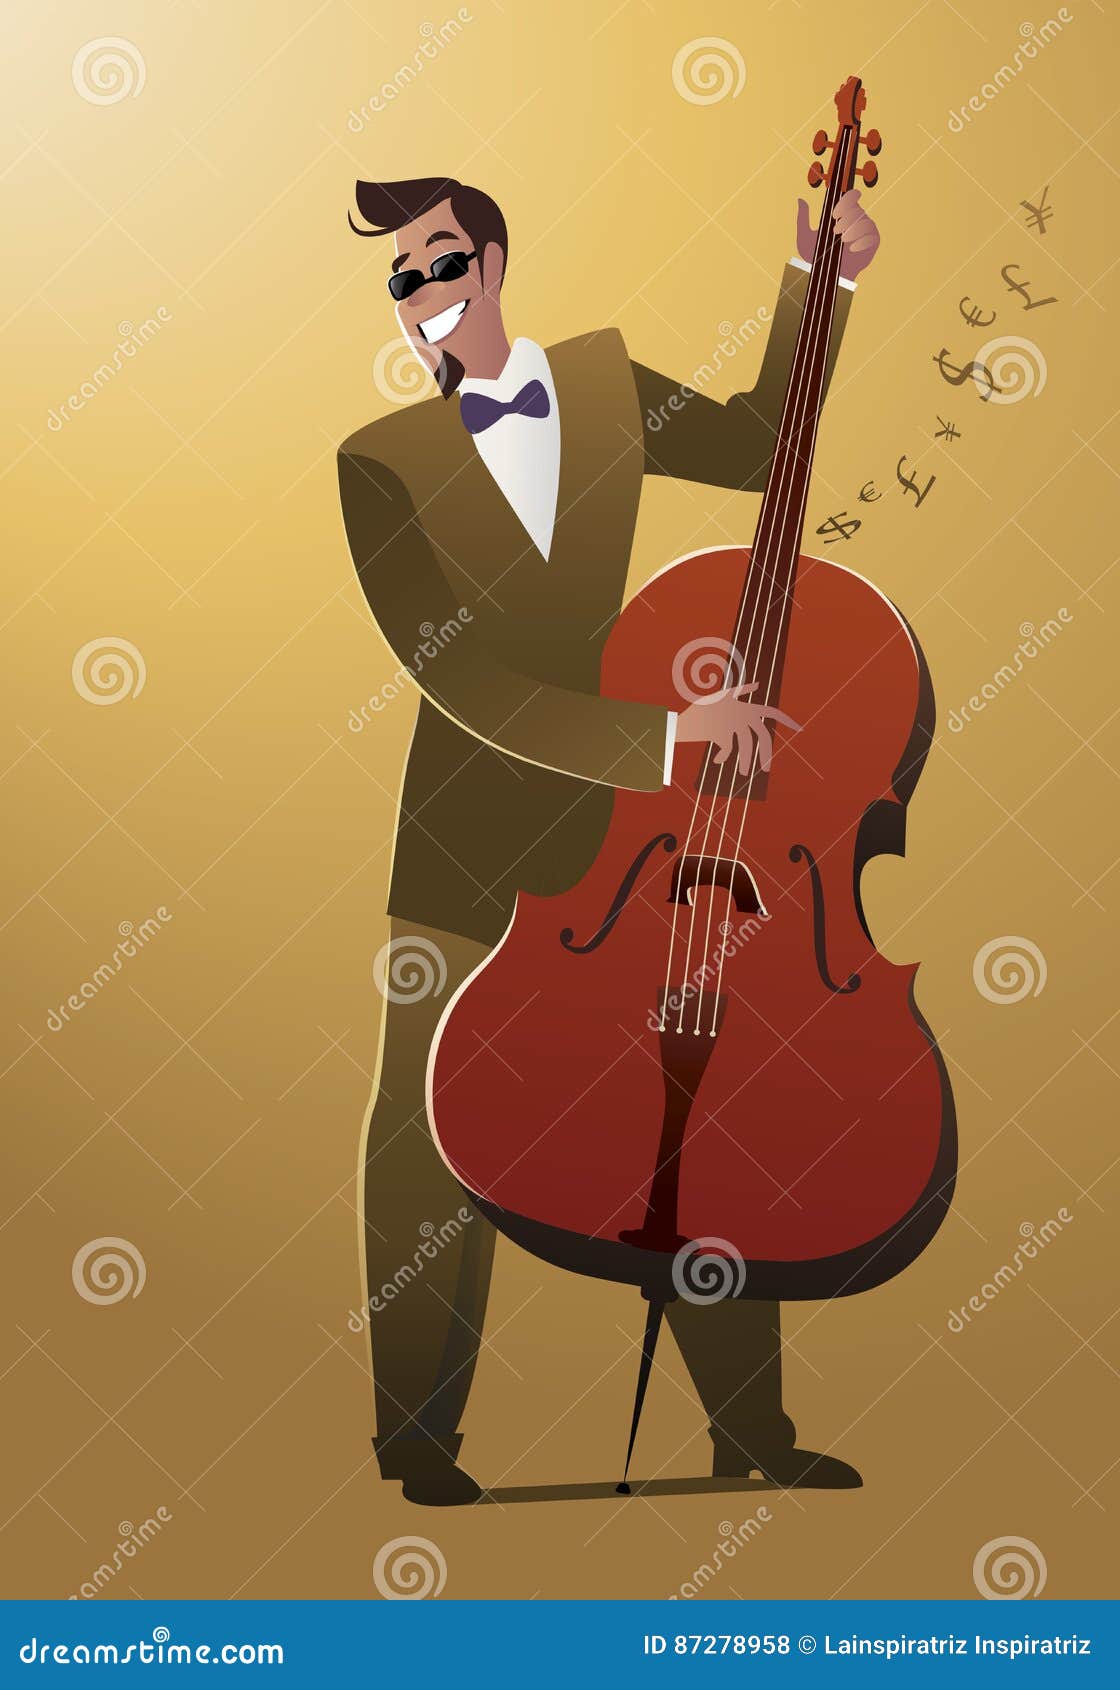 money melody. double bass player playing a song that sounds like